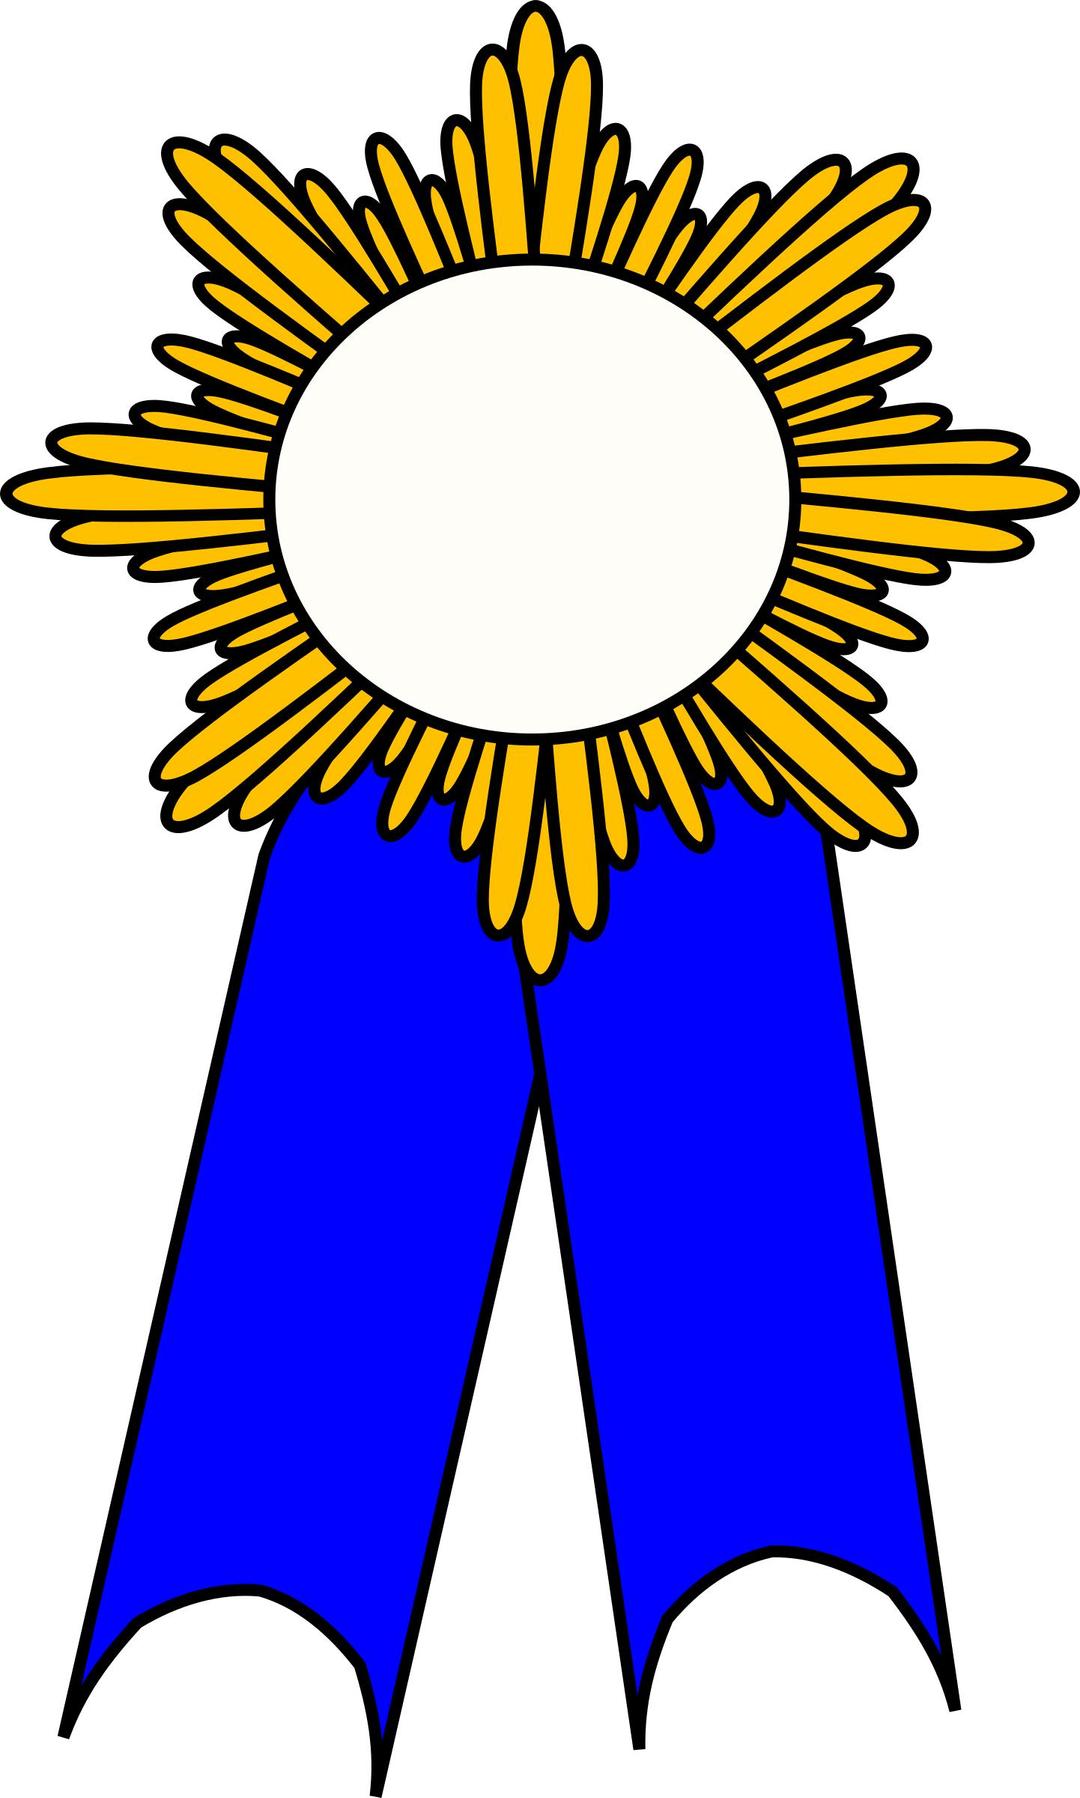 First prize ribbon with gold starburst png transparent